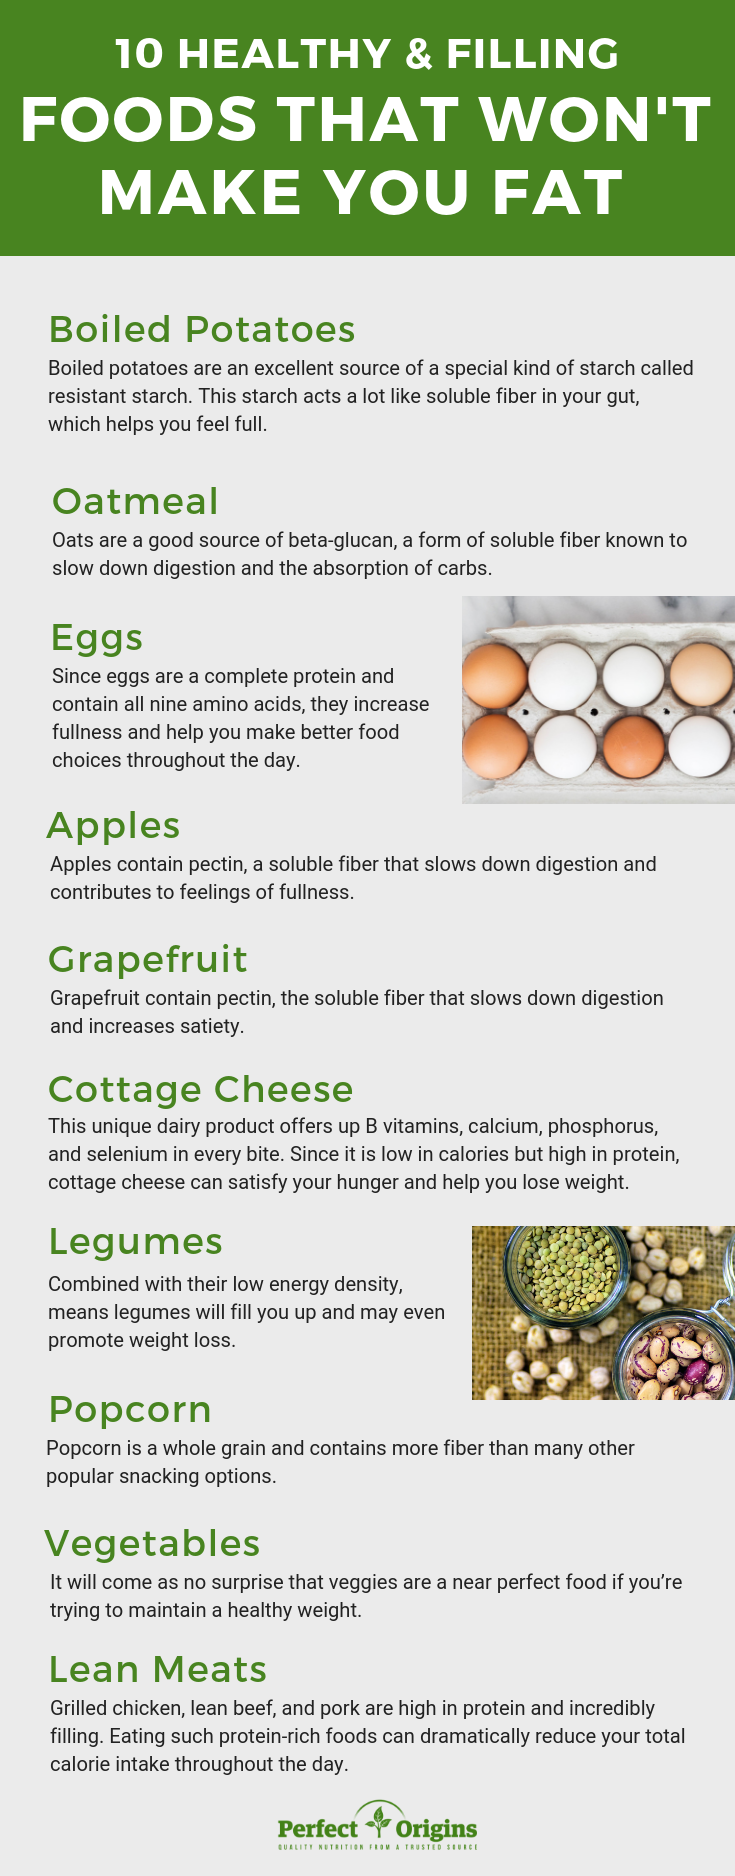 Foods that are filling but won't make you fat